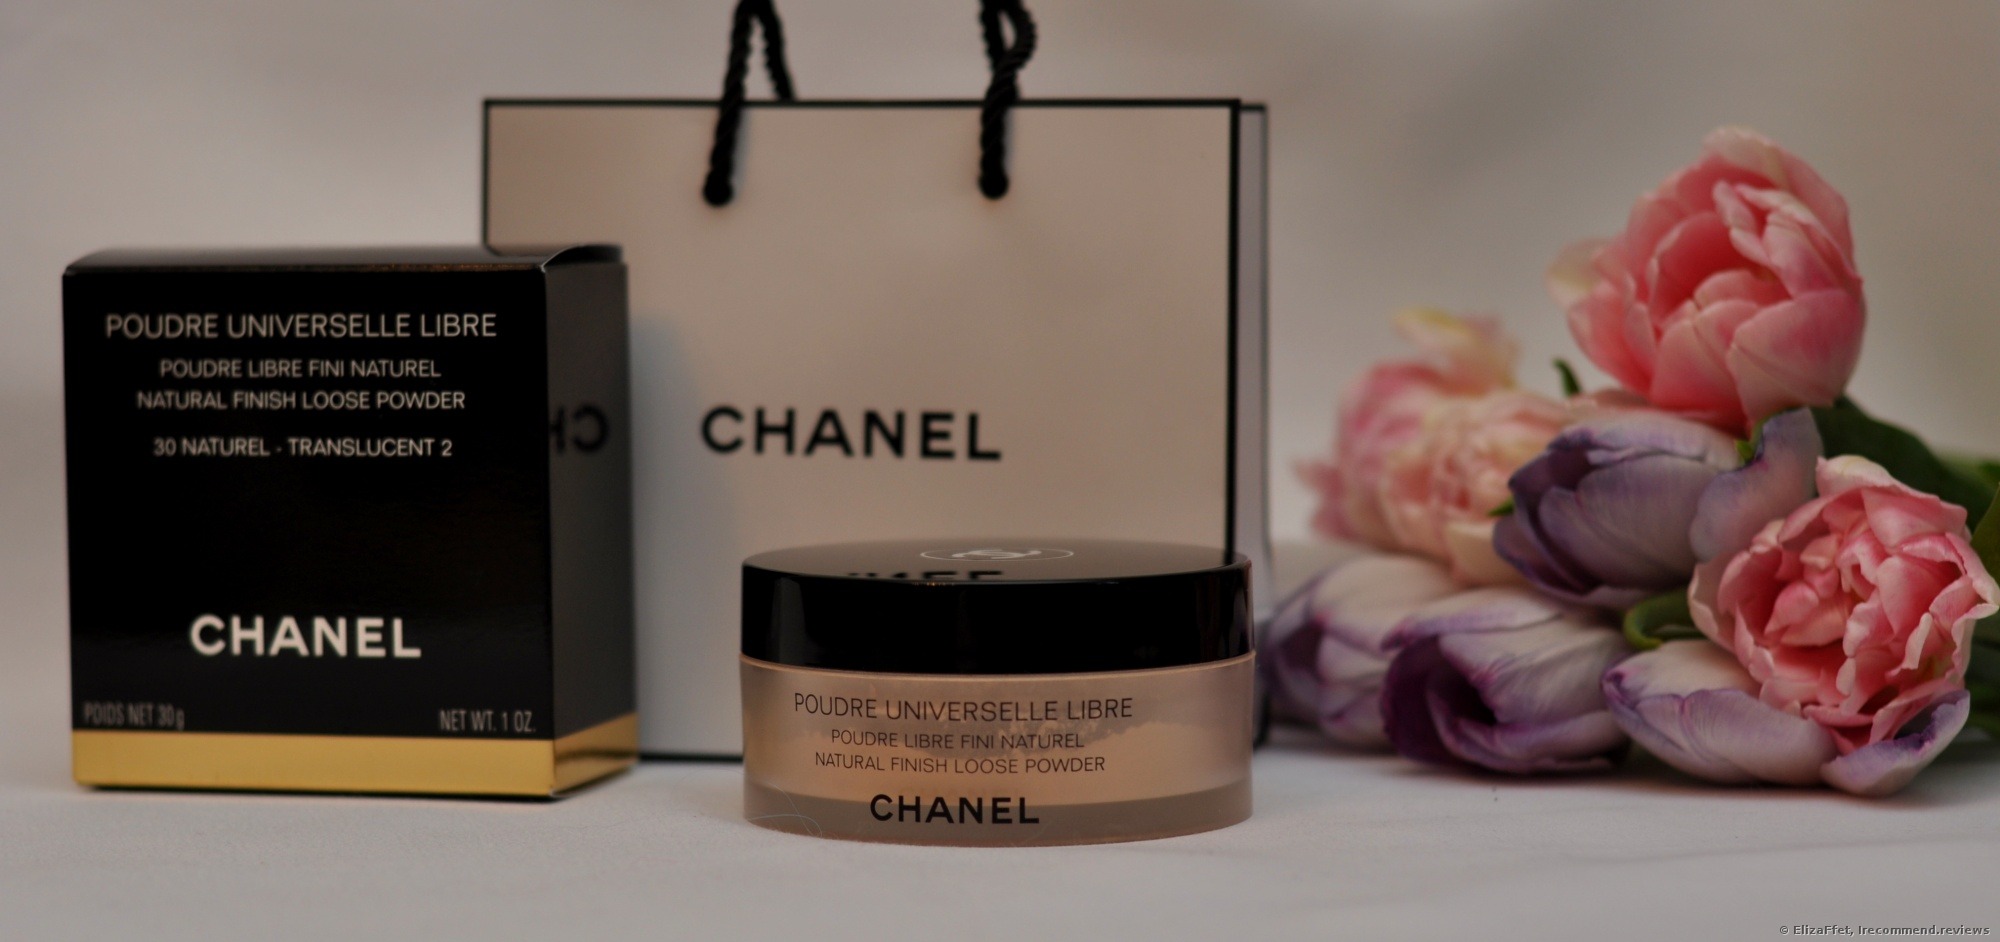 Chanel Poudre Universelle Libre Natural Finish Loose Powder - 30 g